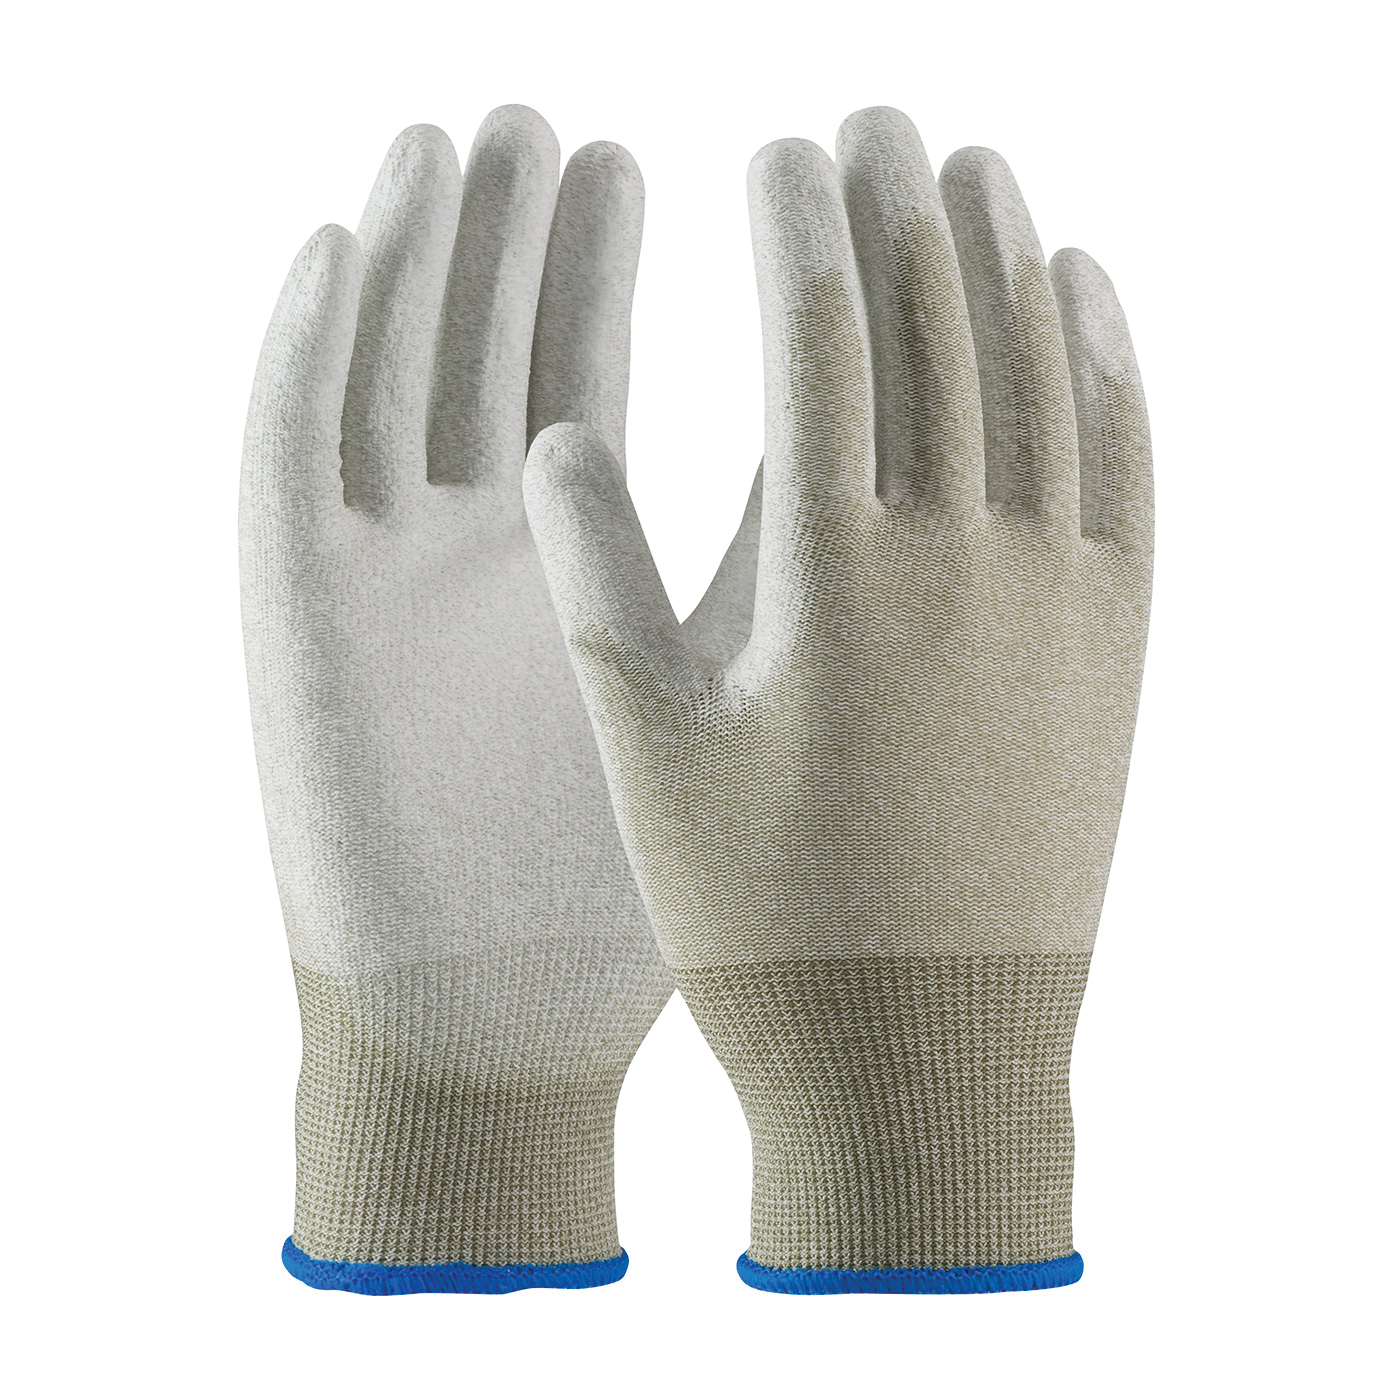 PIP® CleanTeam® 40-6415/S 40-6145 Antistatic Gloves, Seamless Style, 15 ga Nylon/Copper Fiber Yarn, Copper/White, Continuous Knit Wrist Cuff, Polyurethane with Smooth Grip Coating, 8.7 in L, Resists: Abrasion, Cut, Puncture and Tear